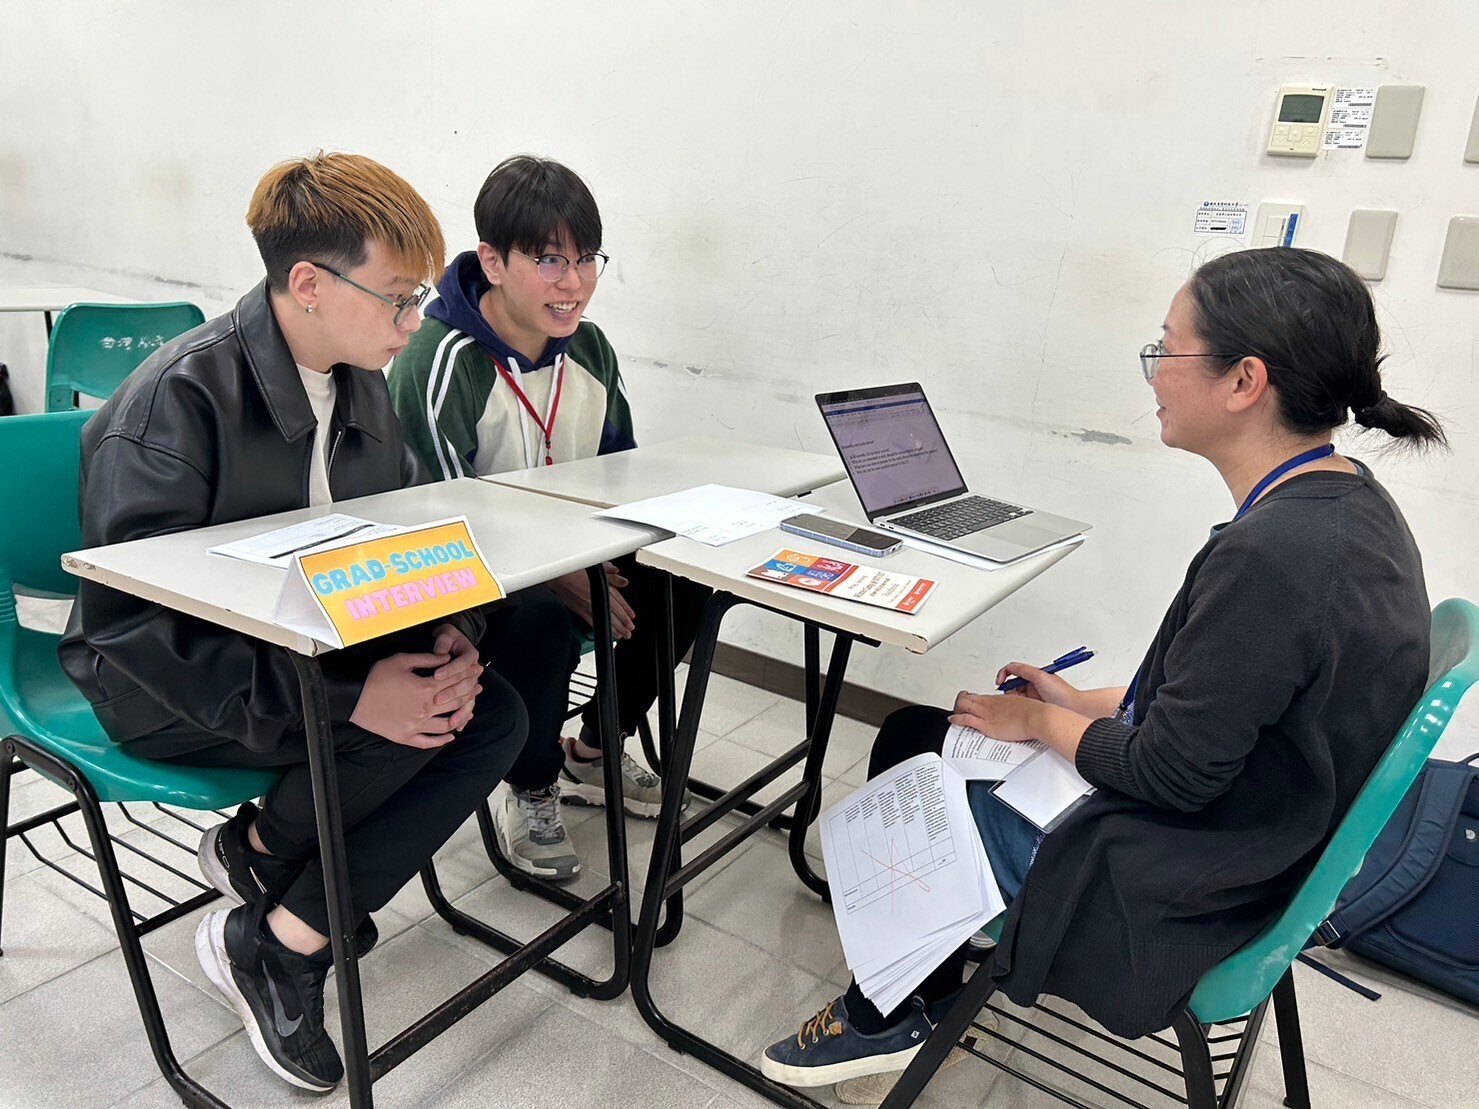 Winter camp program - Research Institute English Interview Practice (The person on the right is the interviewer, and the people on the left are the participating students).